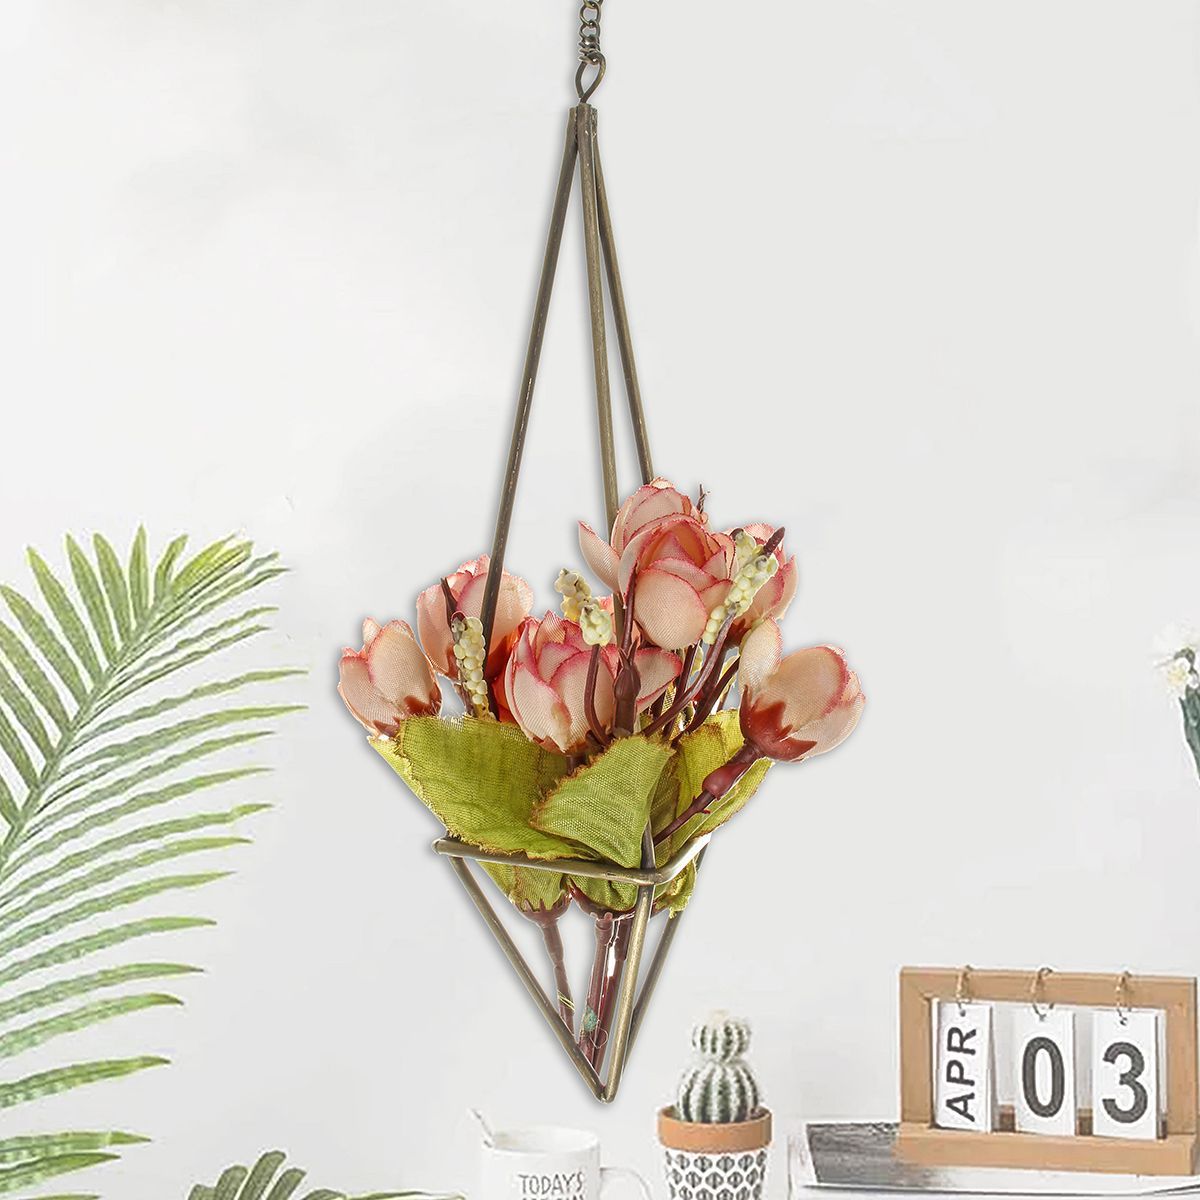 Triangle-Hanging-Wrought-Iron-Pineapple-Flower-Stand-Metal-Hollow-Soilless-Flower-Pot-Simple-Flower--1725074